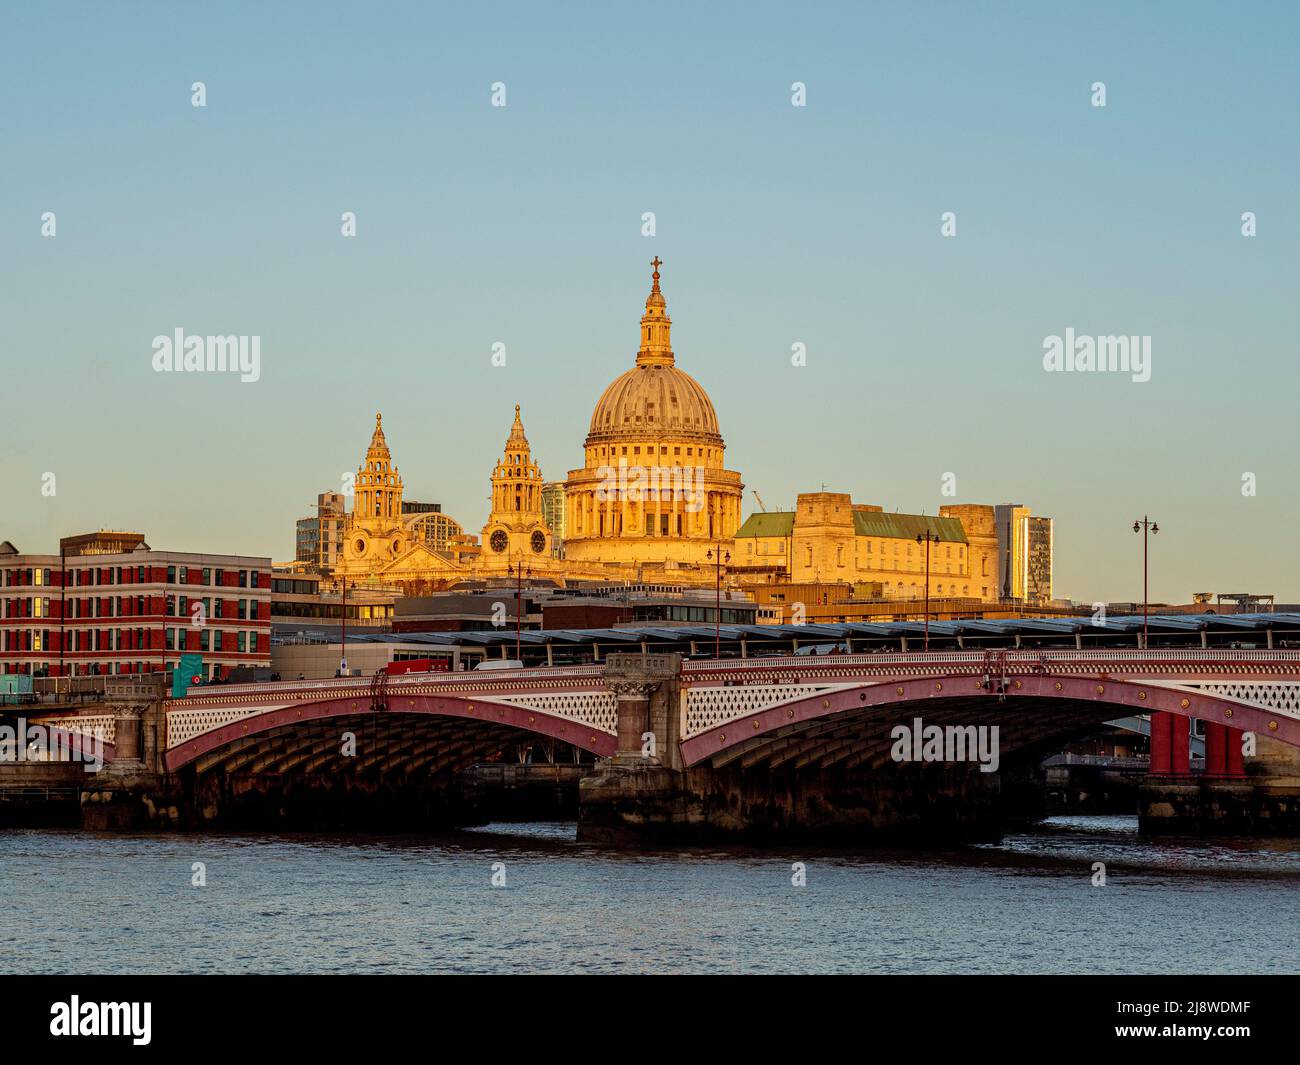 St Paul's Cathedral bathed in late afternoon sun with Blackfriars Bridge crossing the river Thames in the foreground. London. Stock Photo